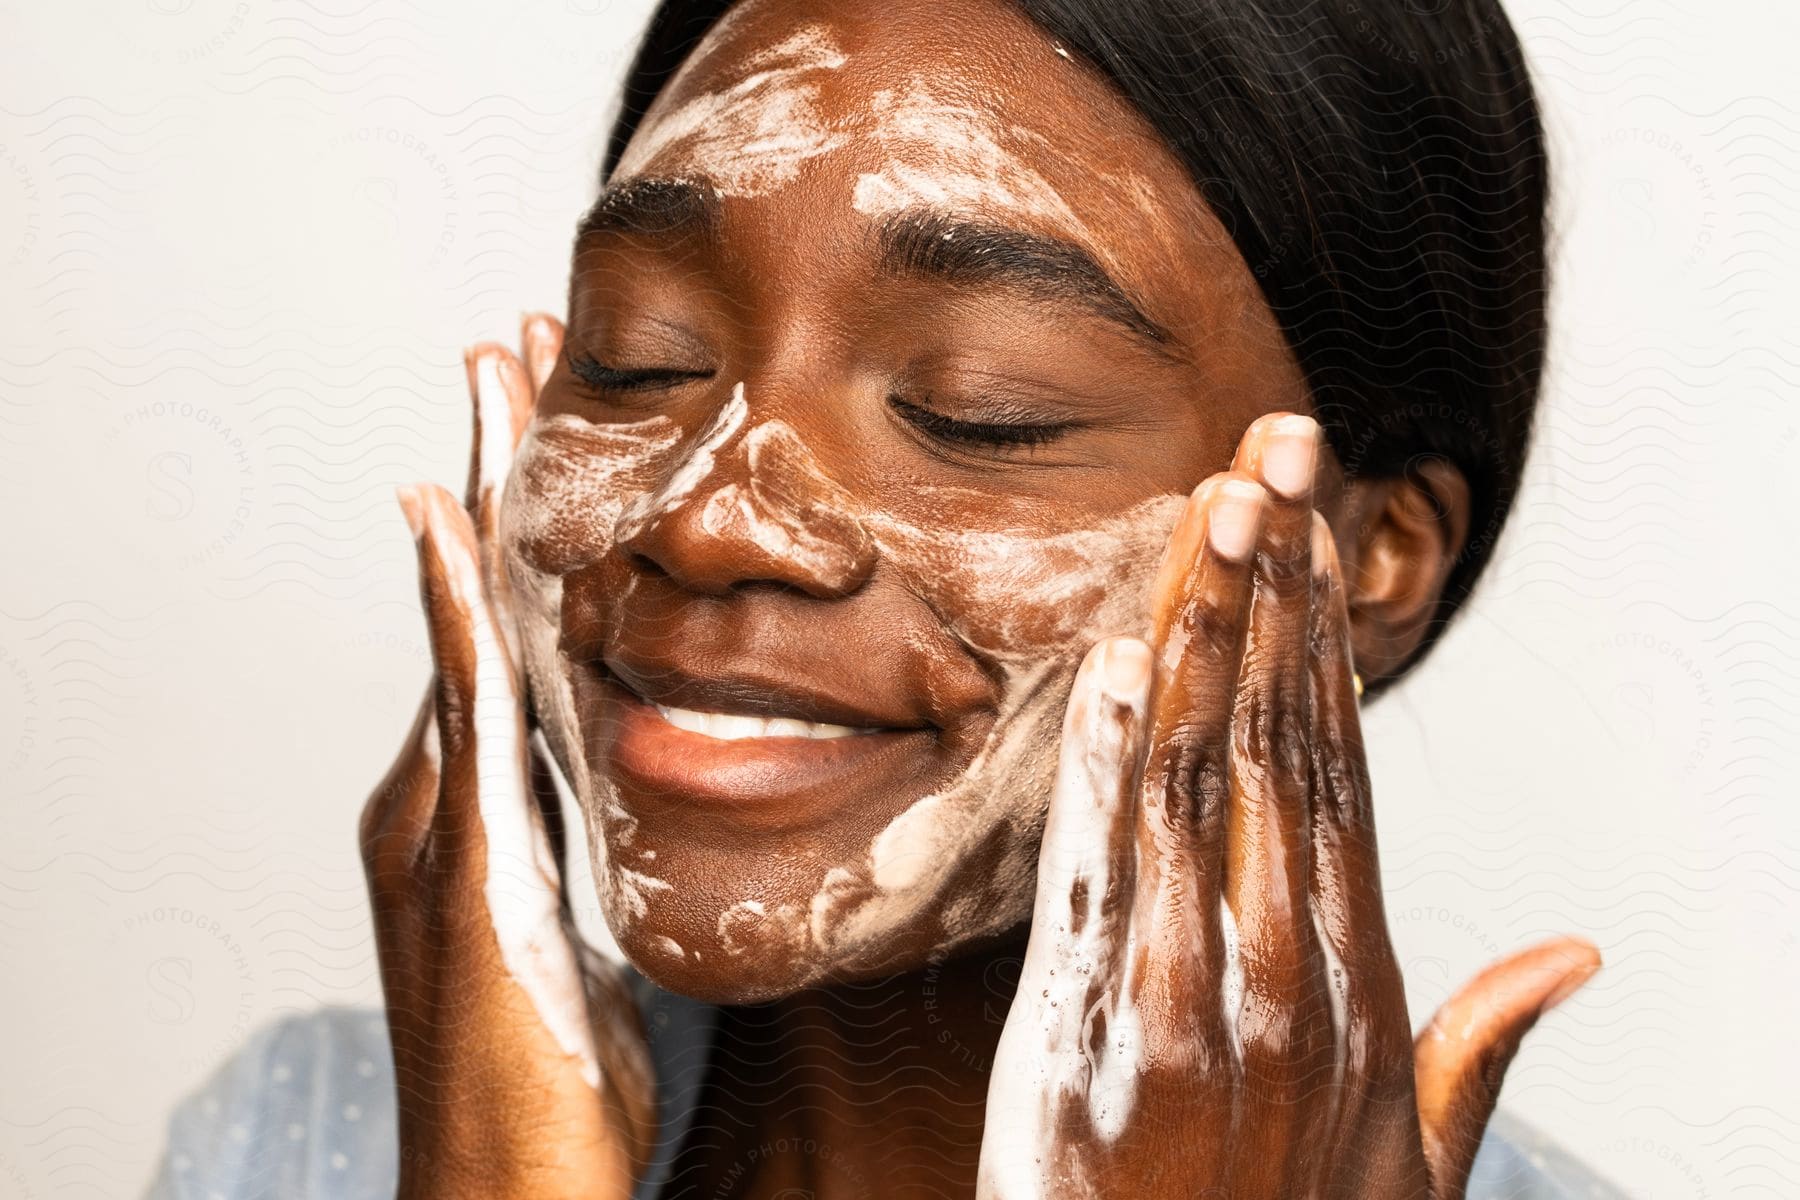 A portrait of a woman smiling while washing her face.